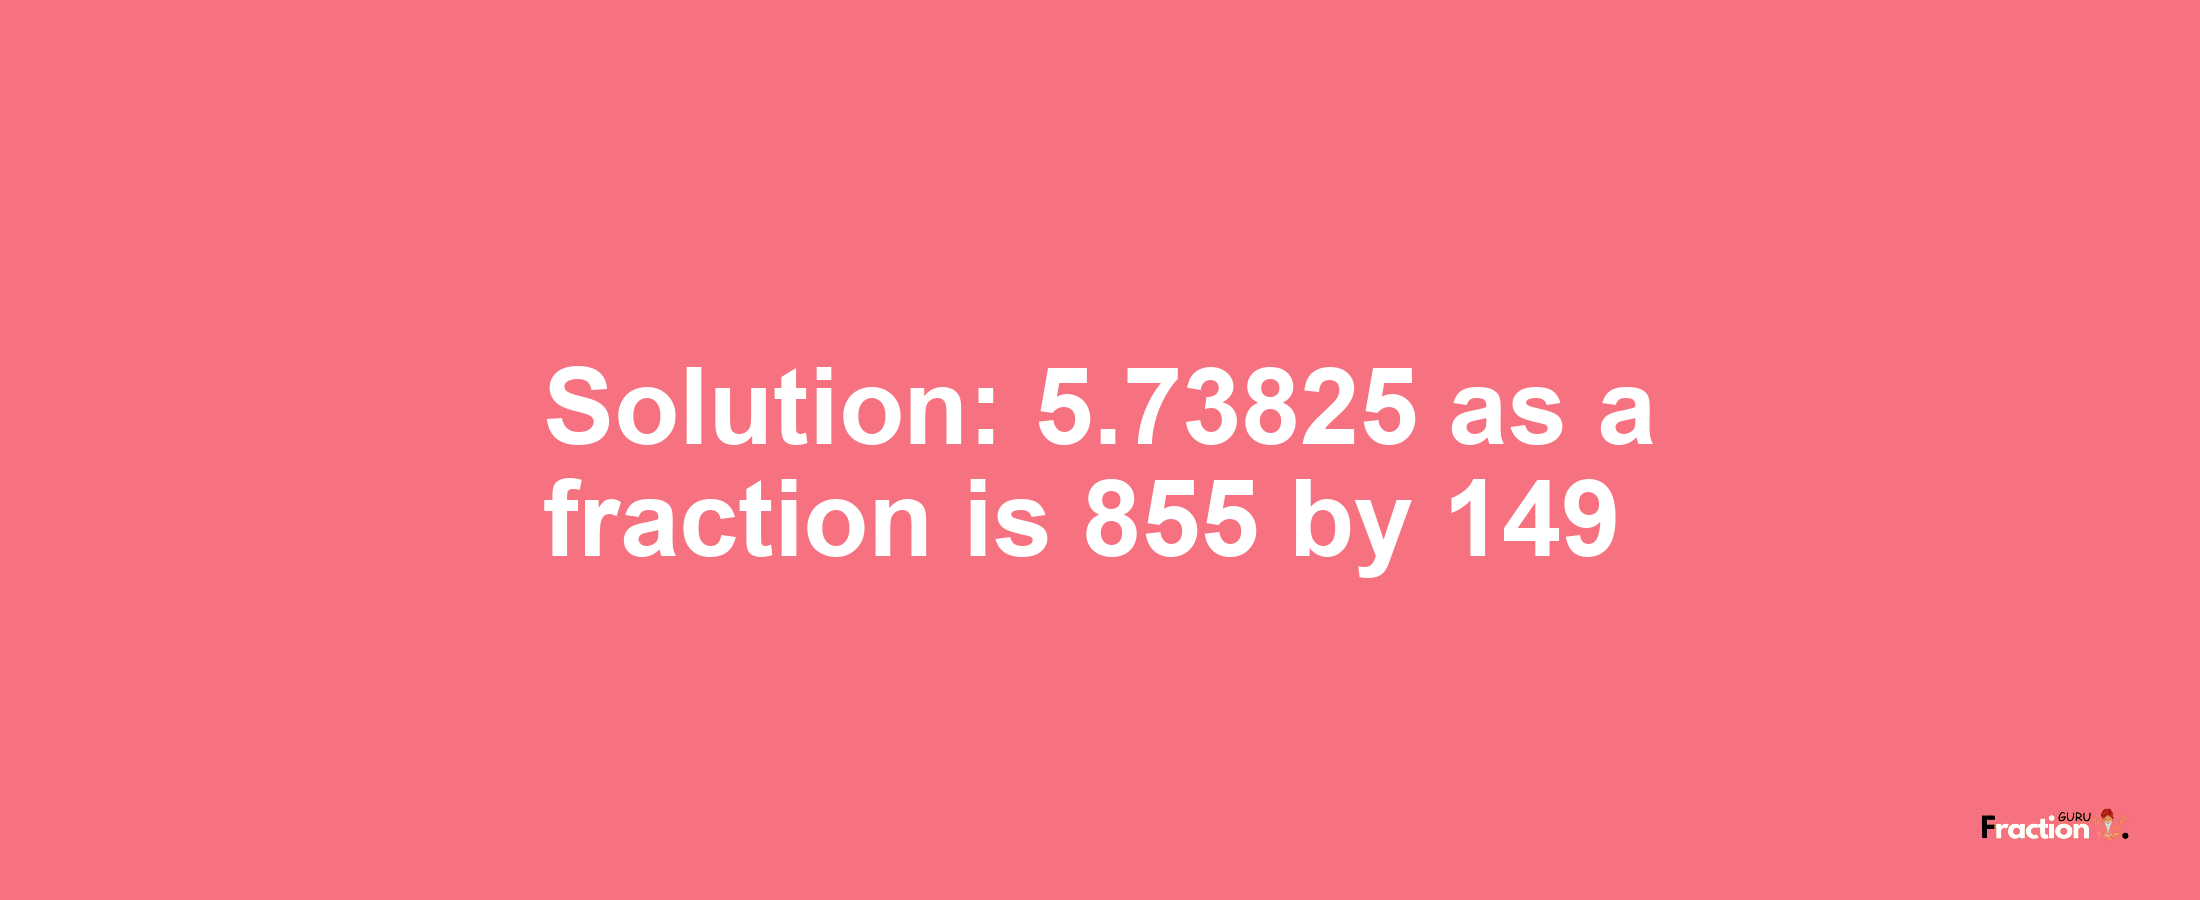 Solution:5.73825 as a fraction is 855/149